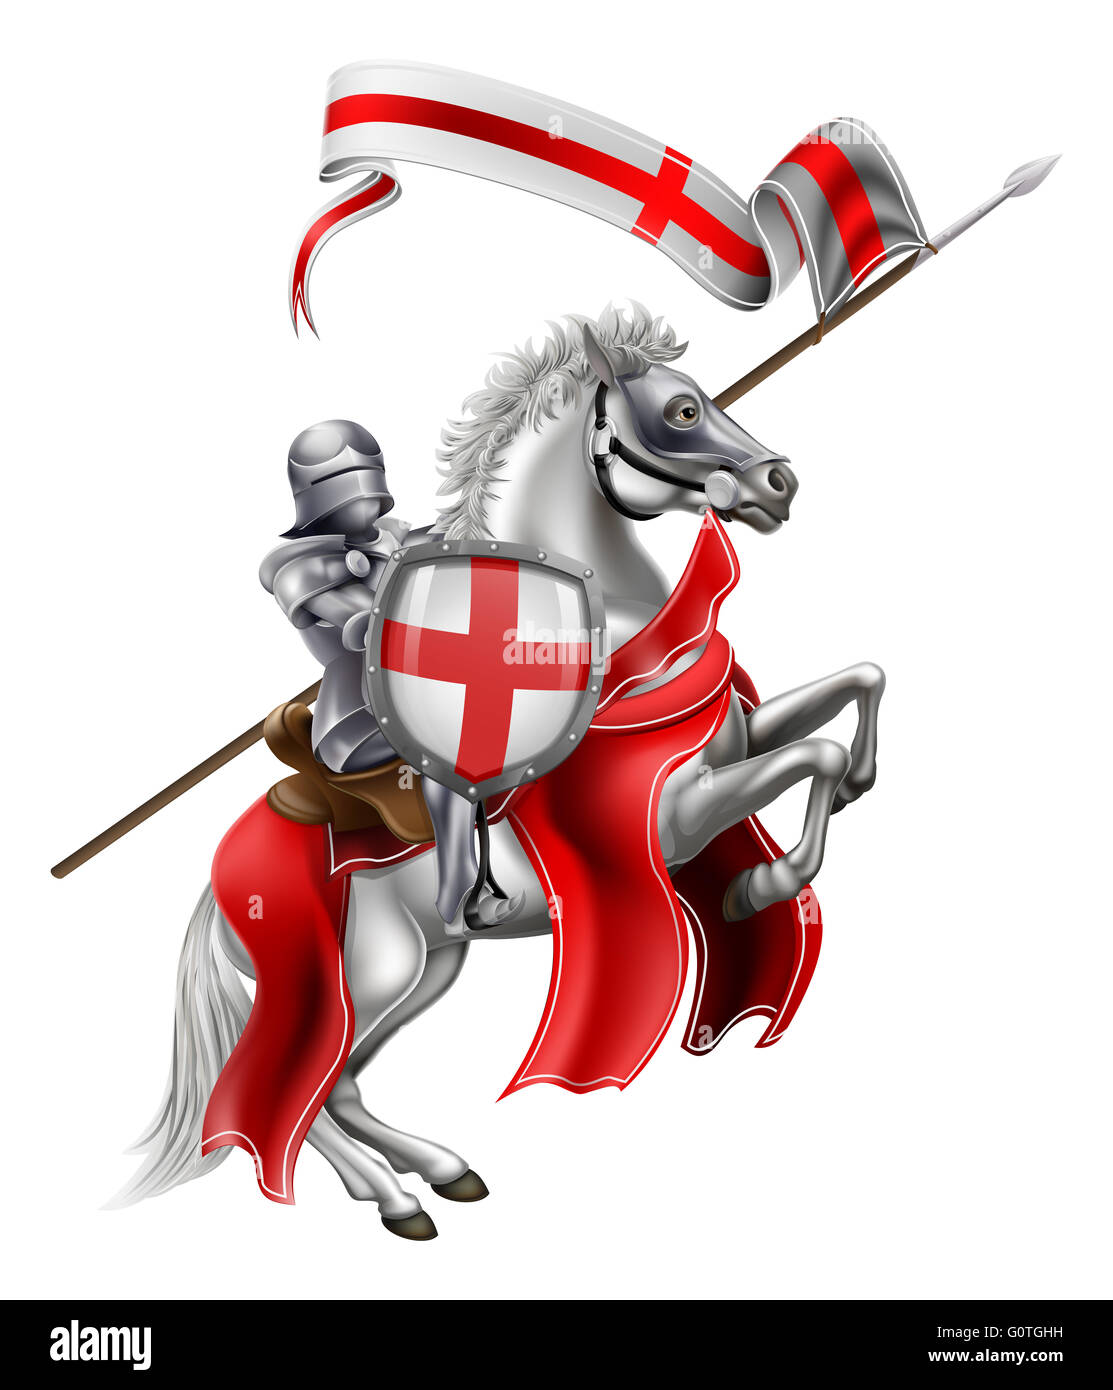 An illustration of Saint George in medieval knight armour mounted on his horse Stock Photo